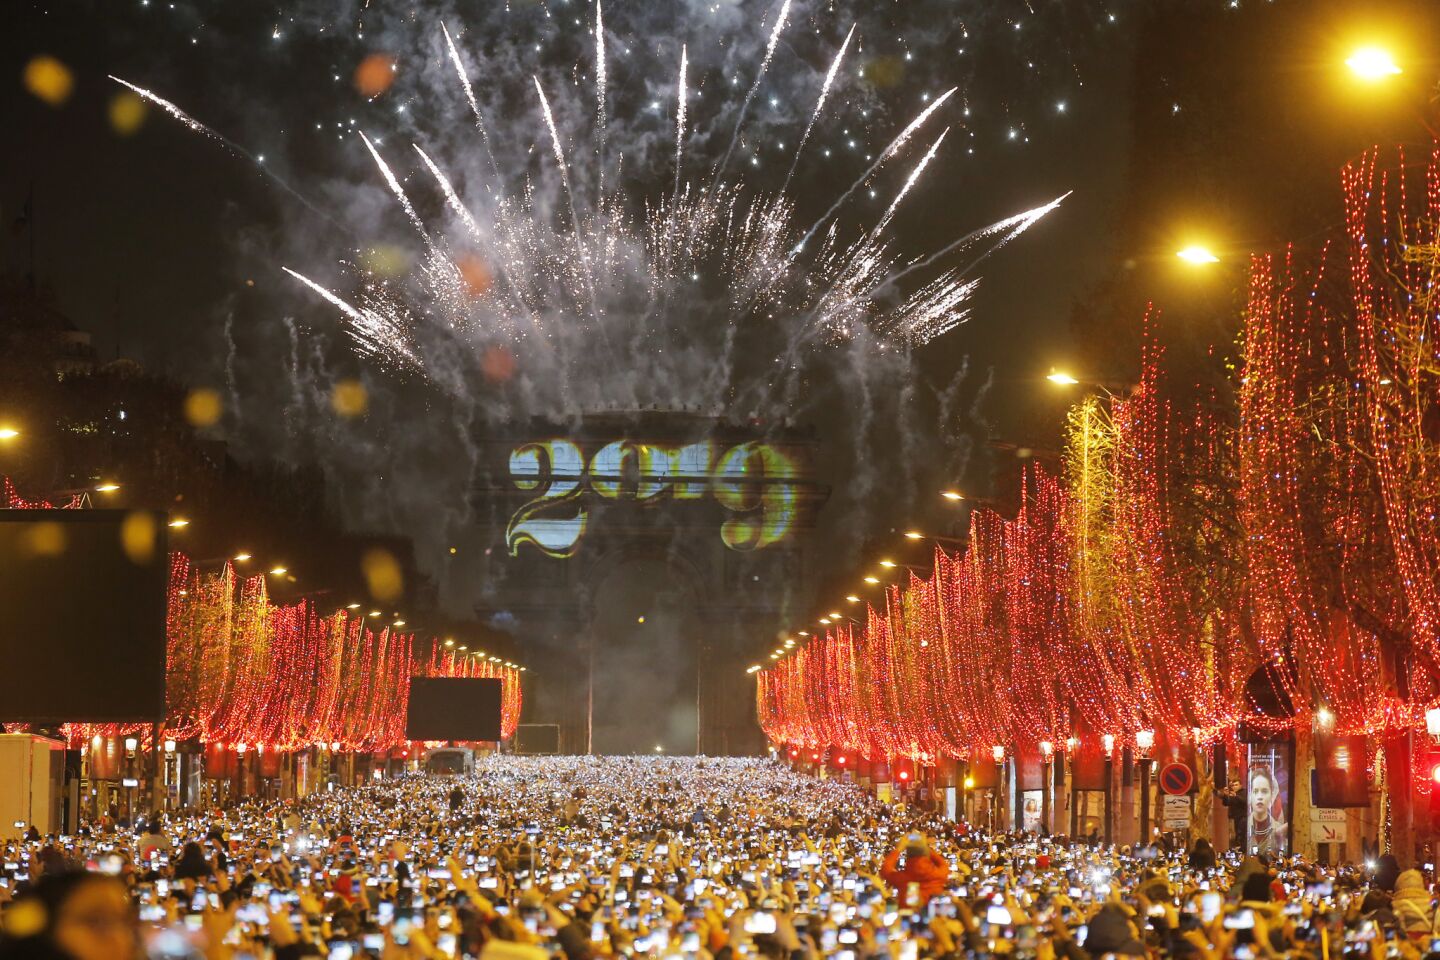 Fireworks illuminate the sky over the Arc de Triomphe in the first minutes of the new year.